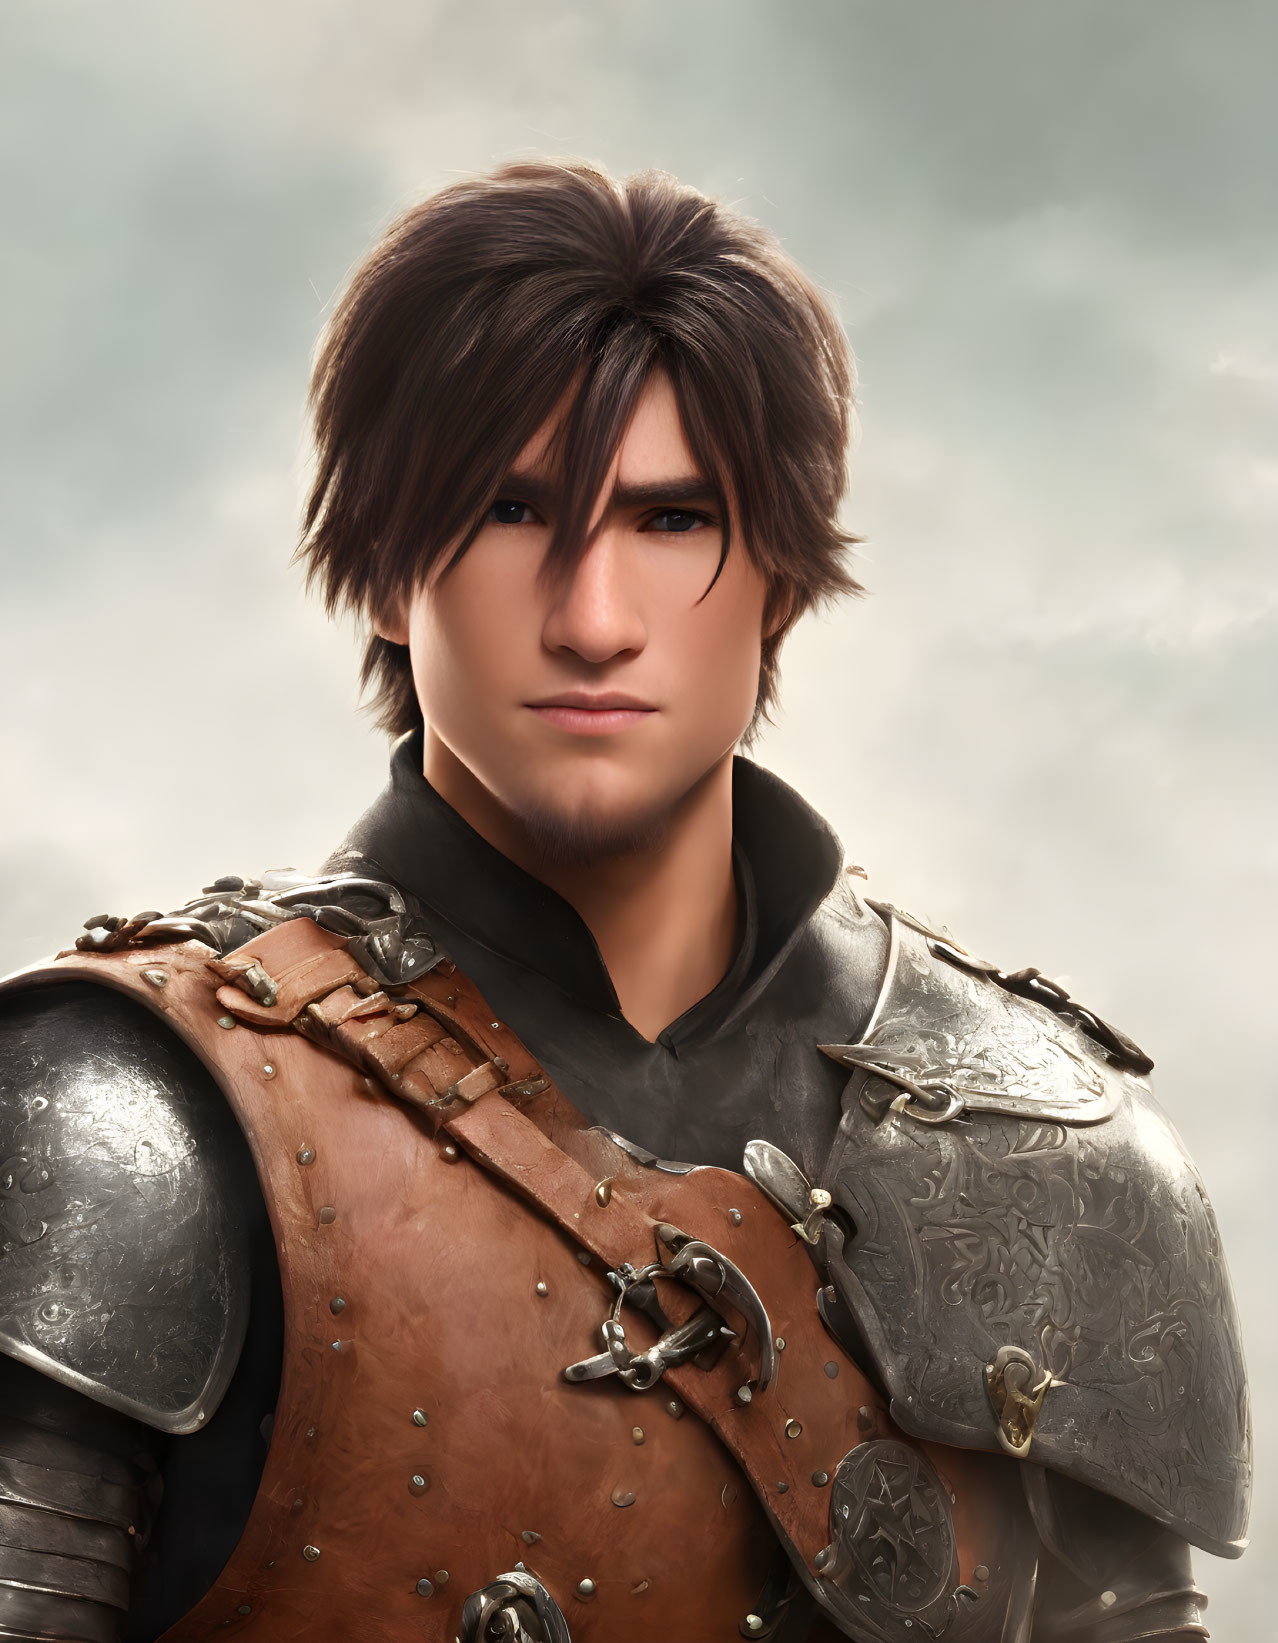 CGI Male Character in Medieval Armor with Brown Hair against Cloudy Sky